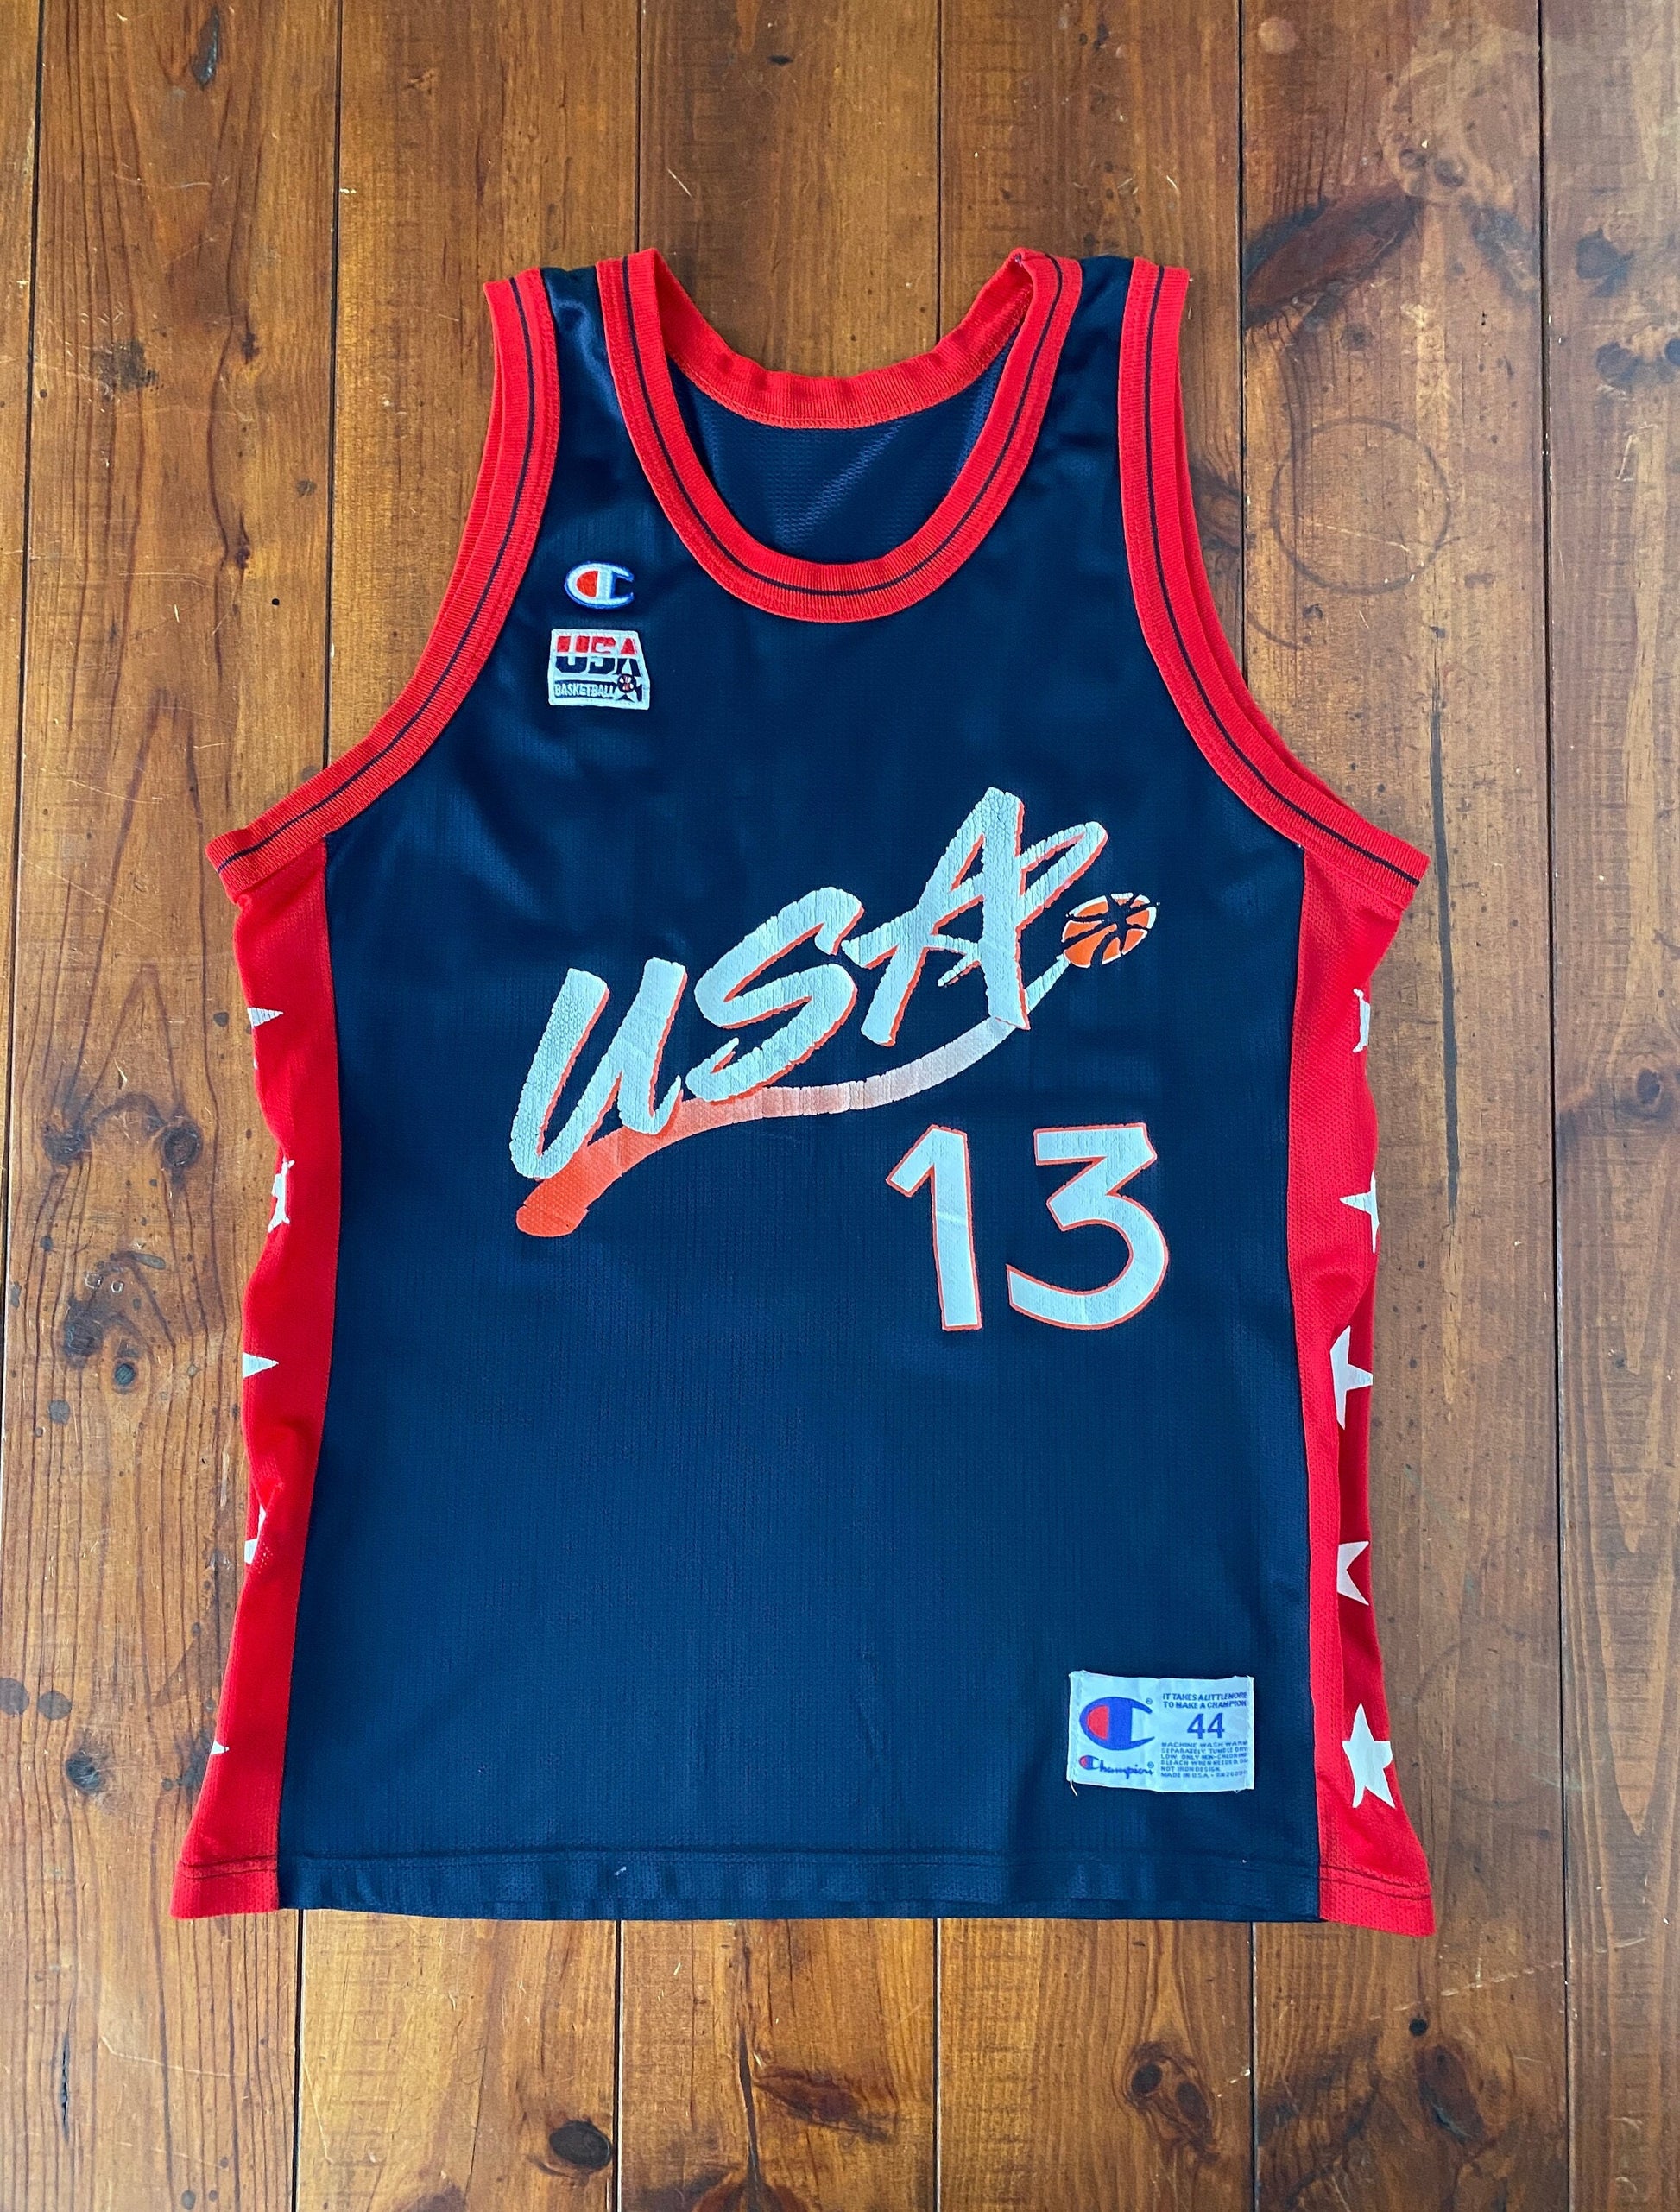 Vintage 90s NBA Champion USA Olympics Dream Team jersey, size 44, featuring Shaq O'Neal #13 - front view. Made in USA.